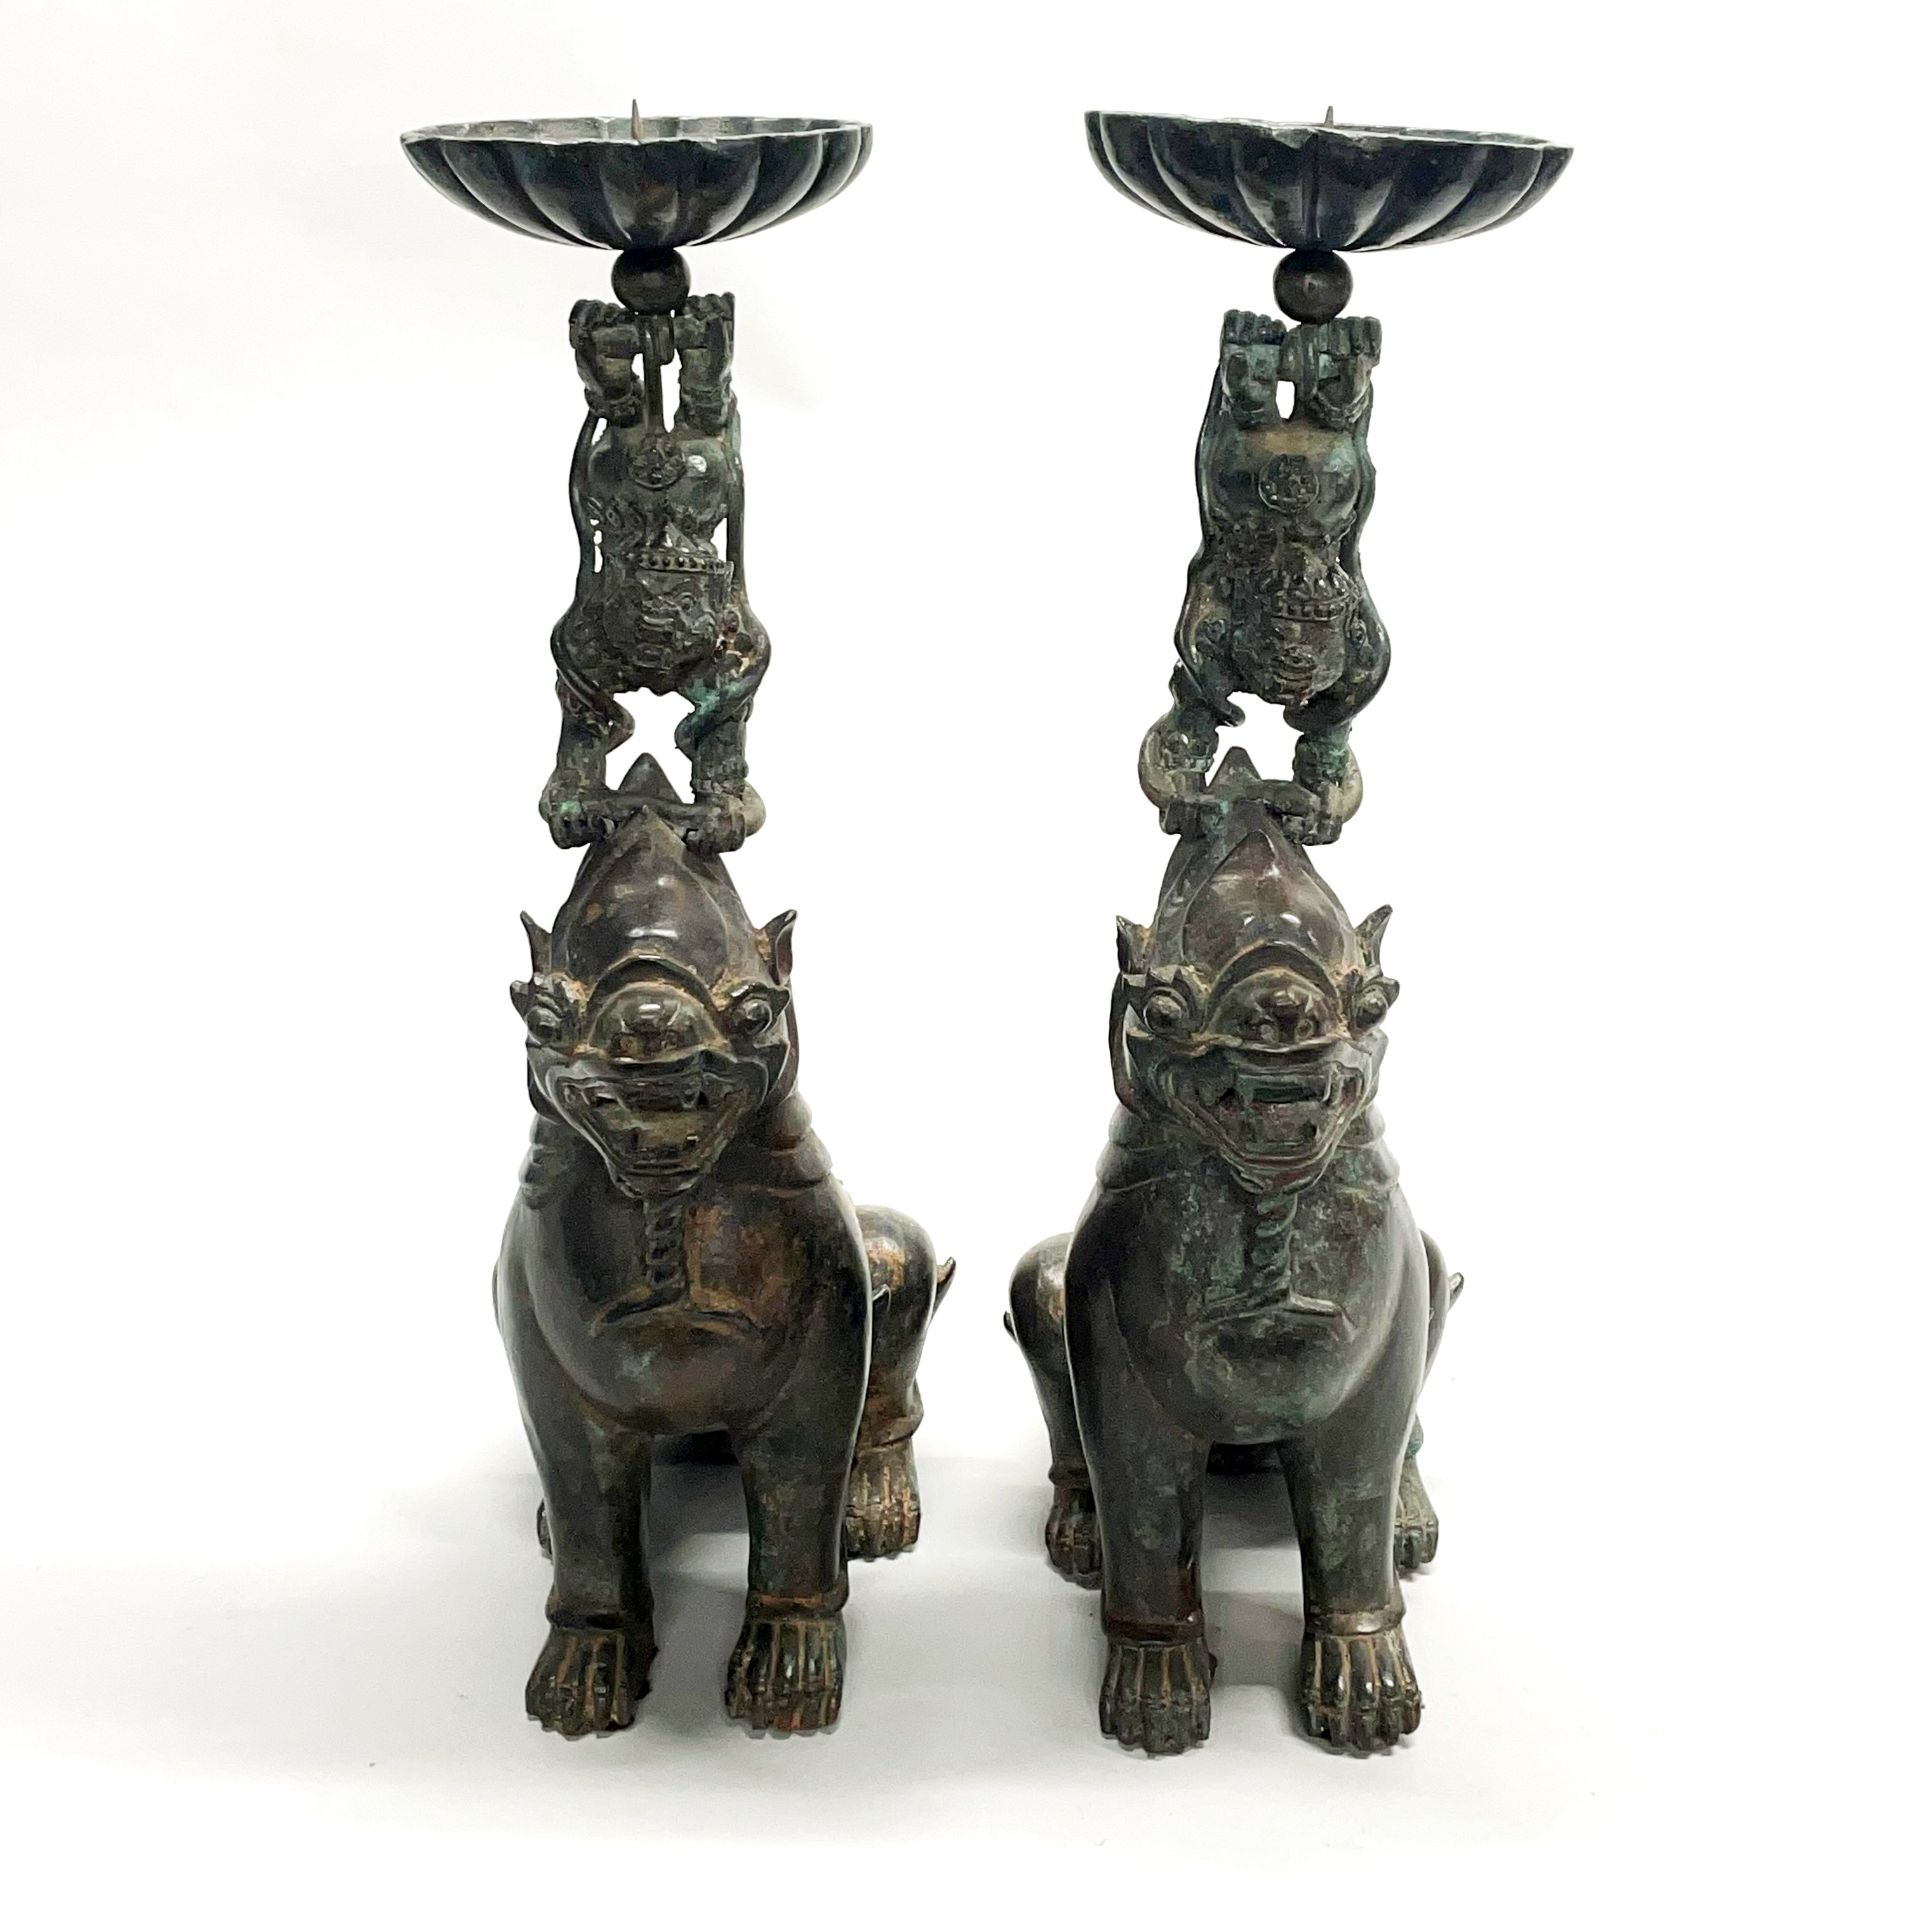 A pair of large Chinese bronze mythical animal pricket candlesticks featuring liondogs performing